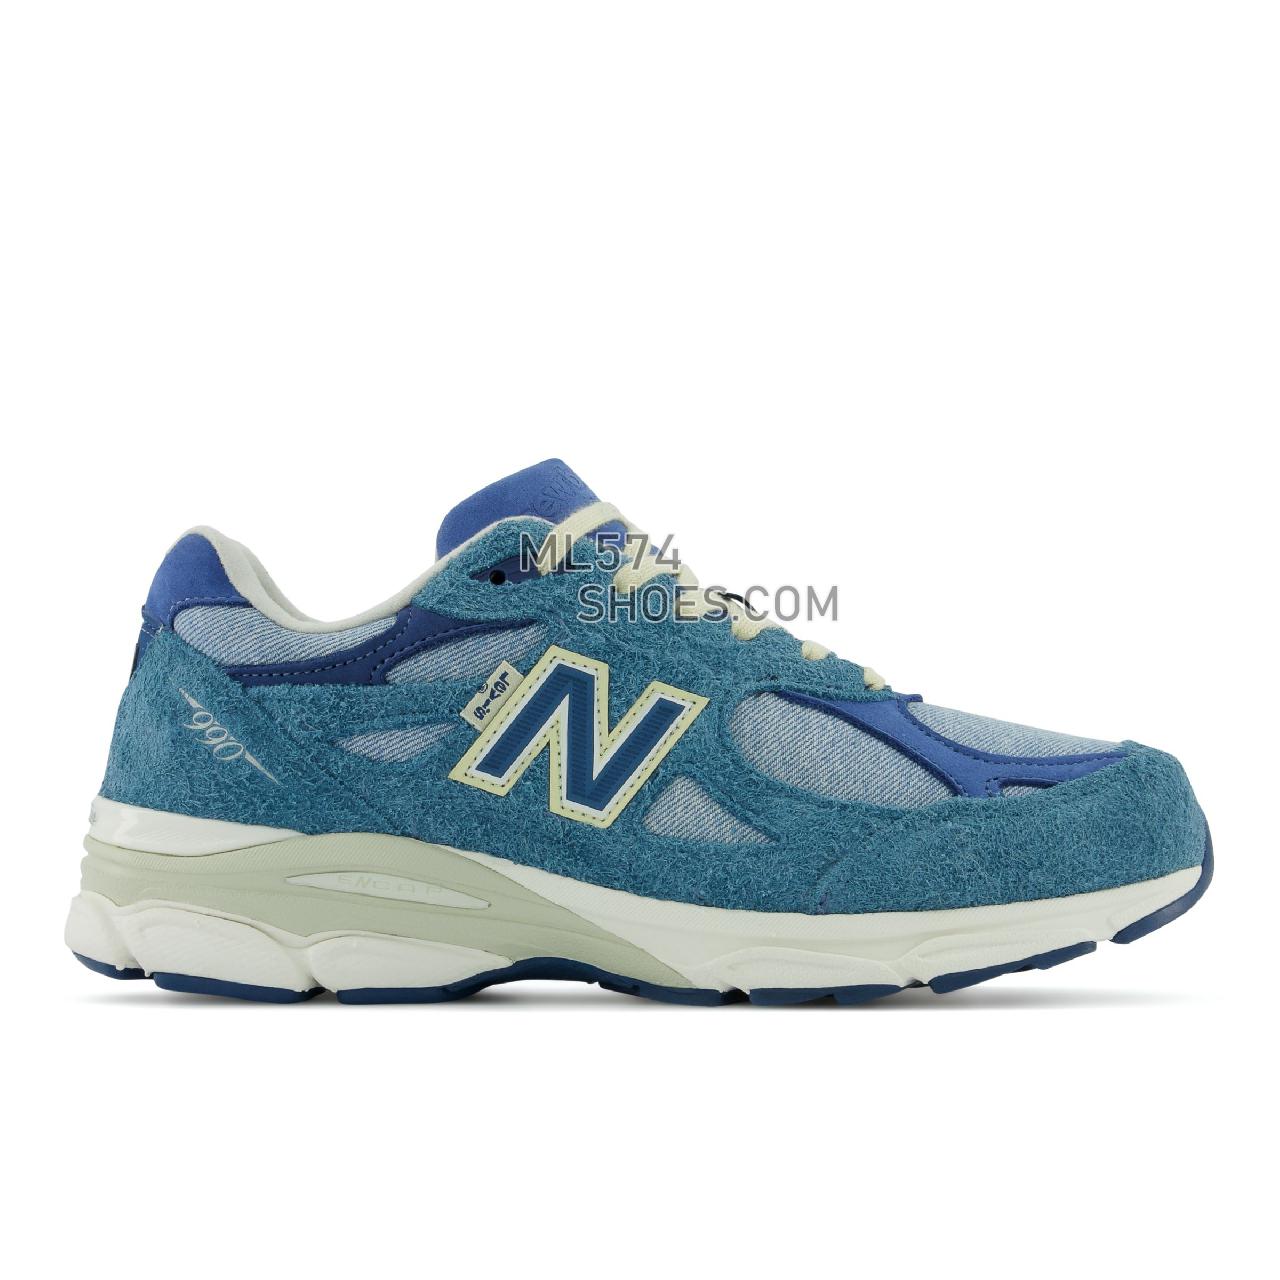 New Balance Made in USA 990v3 Levis - Unisex Men's Women's Made in USA And UK Sneakers - Mallard Blue with Dark Blue - M990LI3